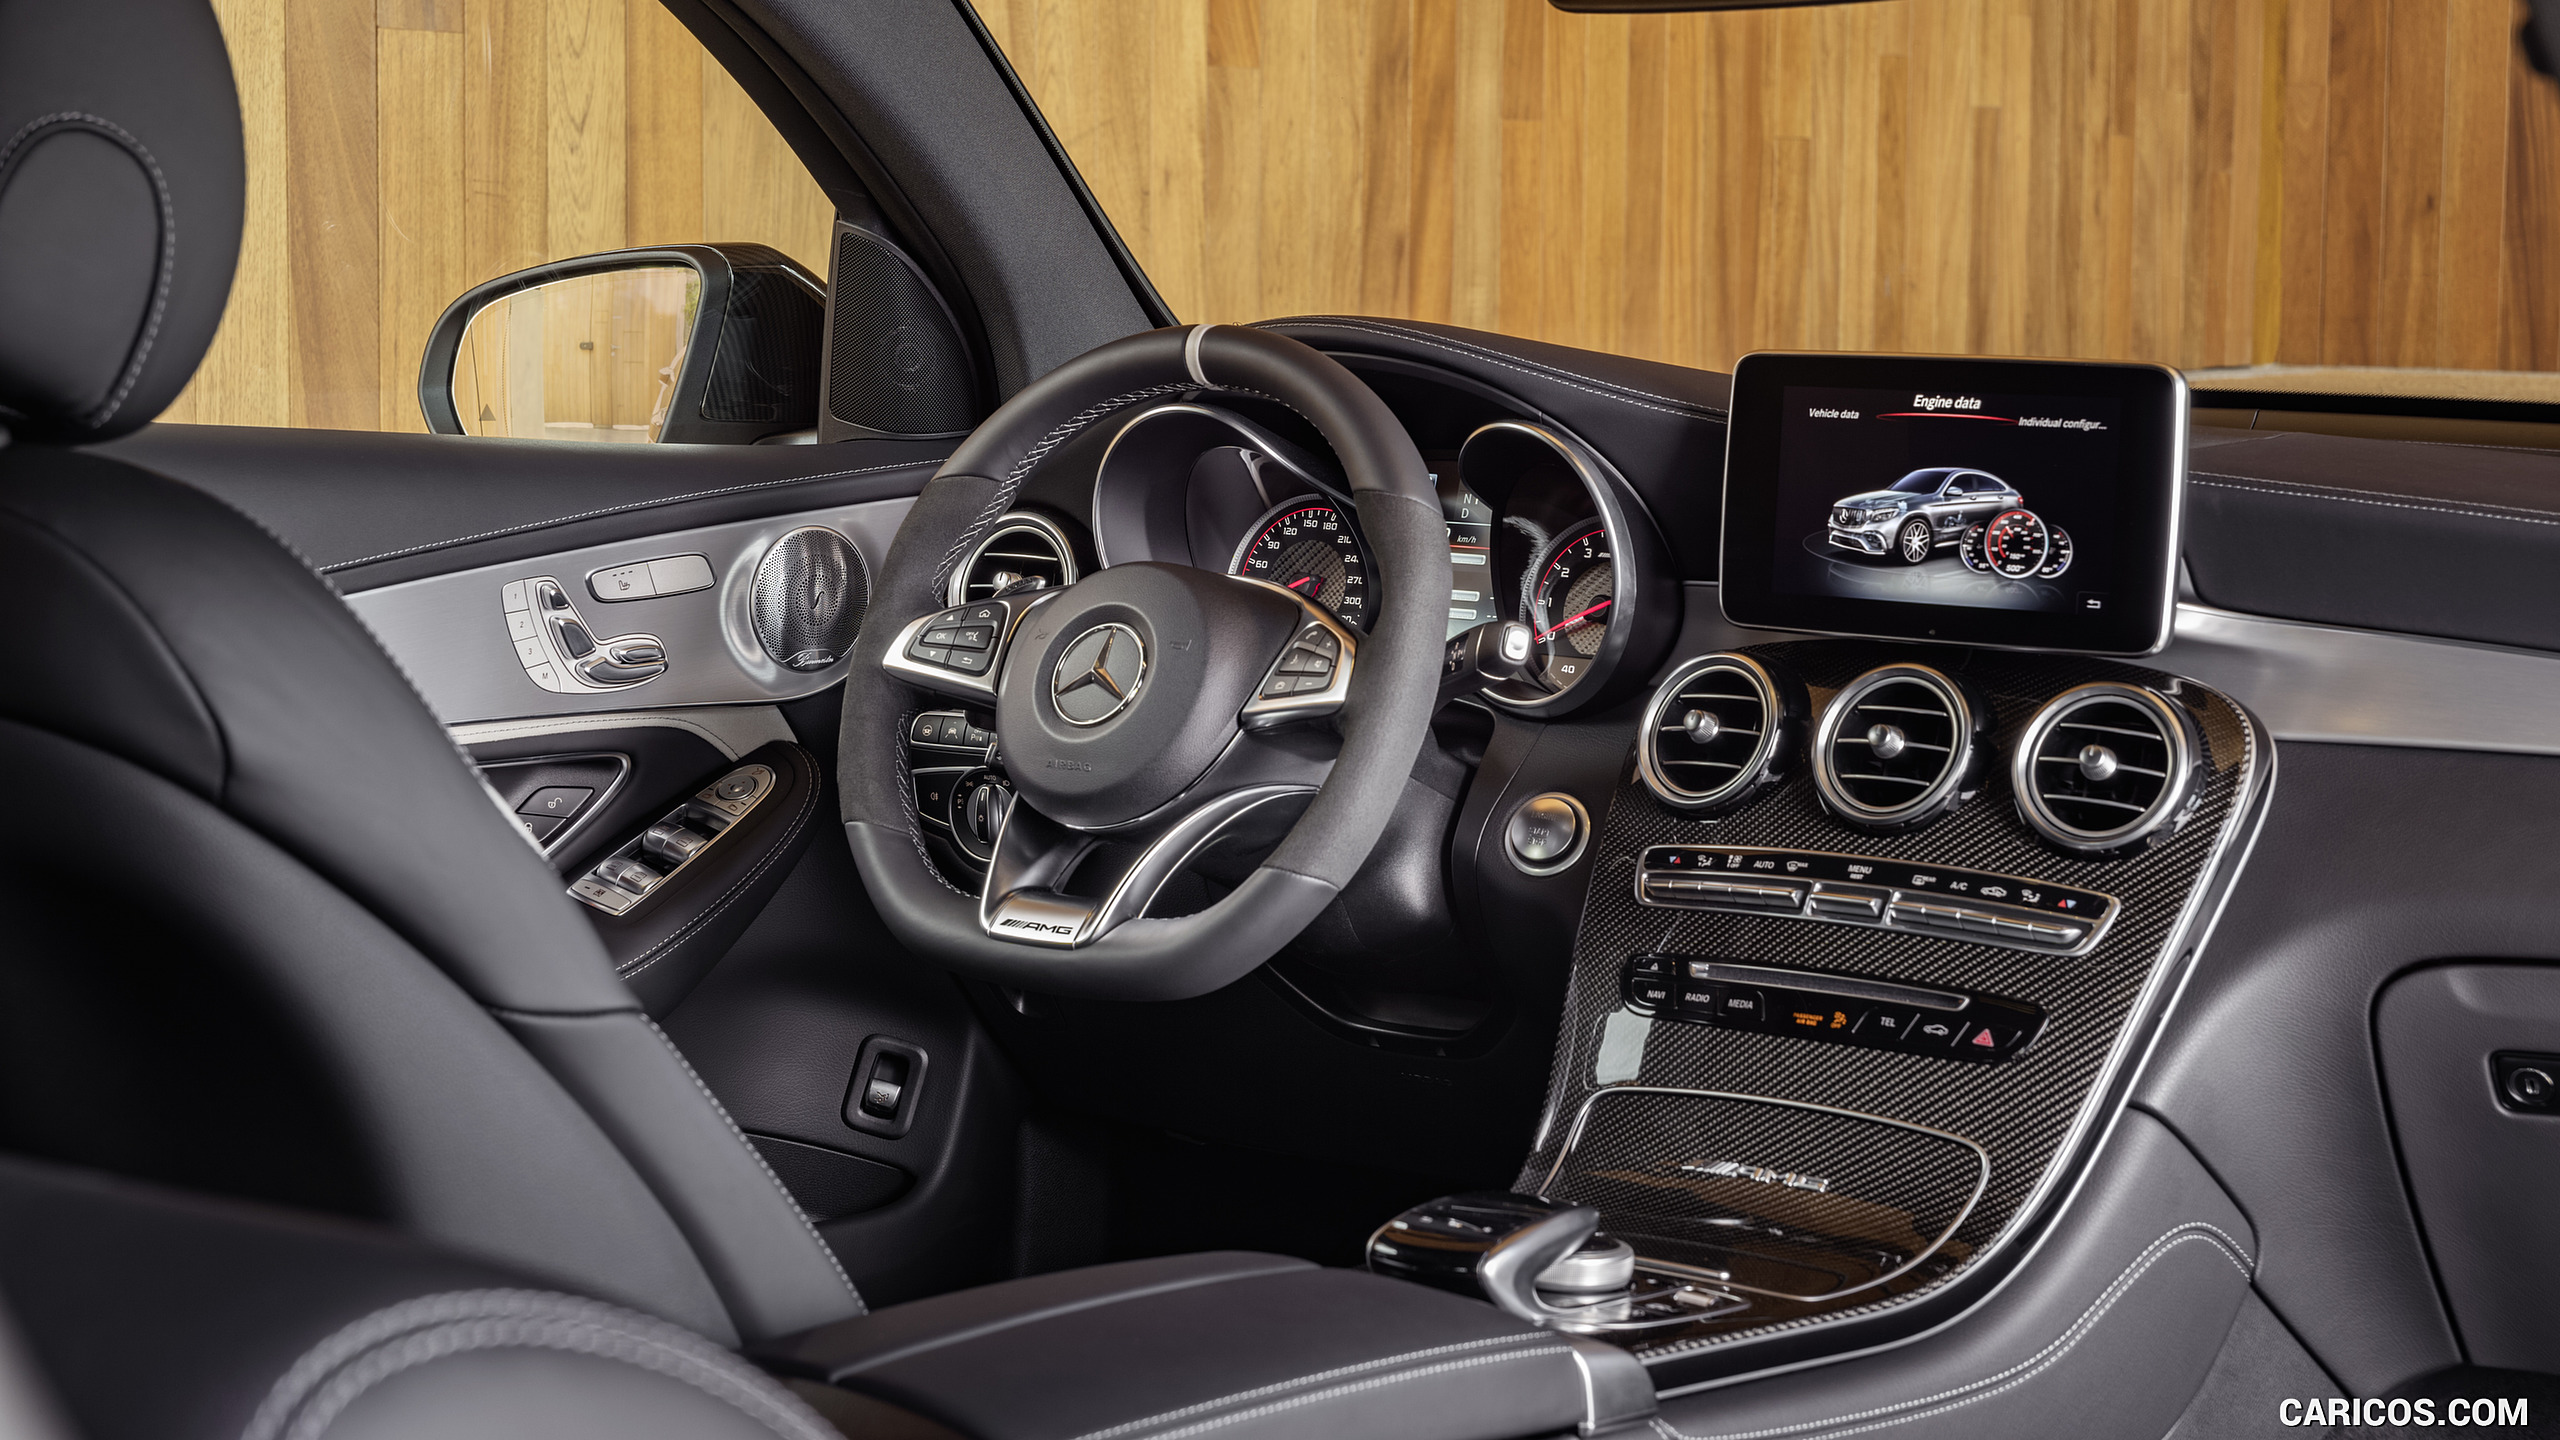 2018 Mercedes-AMG GLC 63 S Coupe 4MATIC+ Edition 1 - Interior, #25 of 75